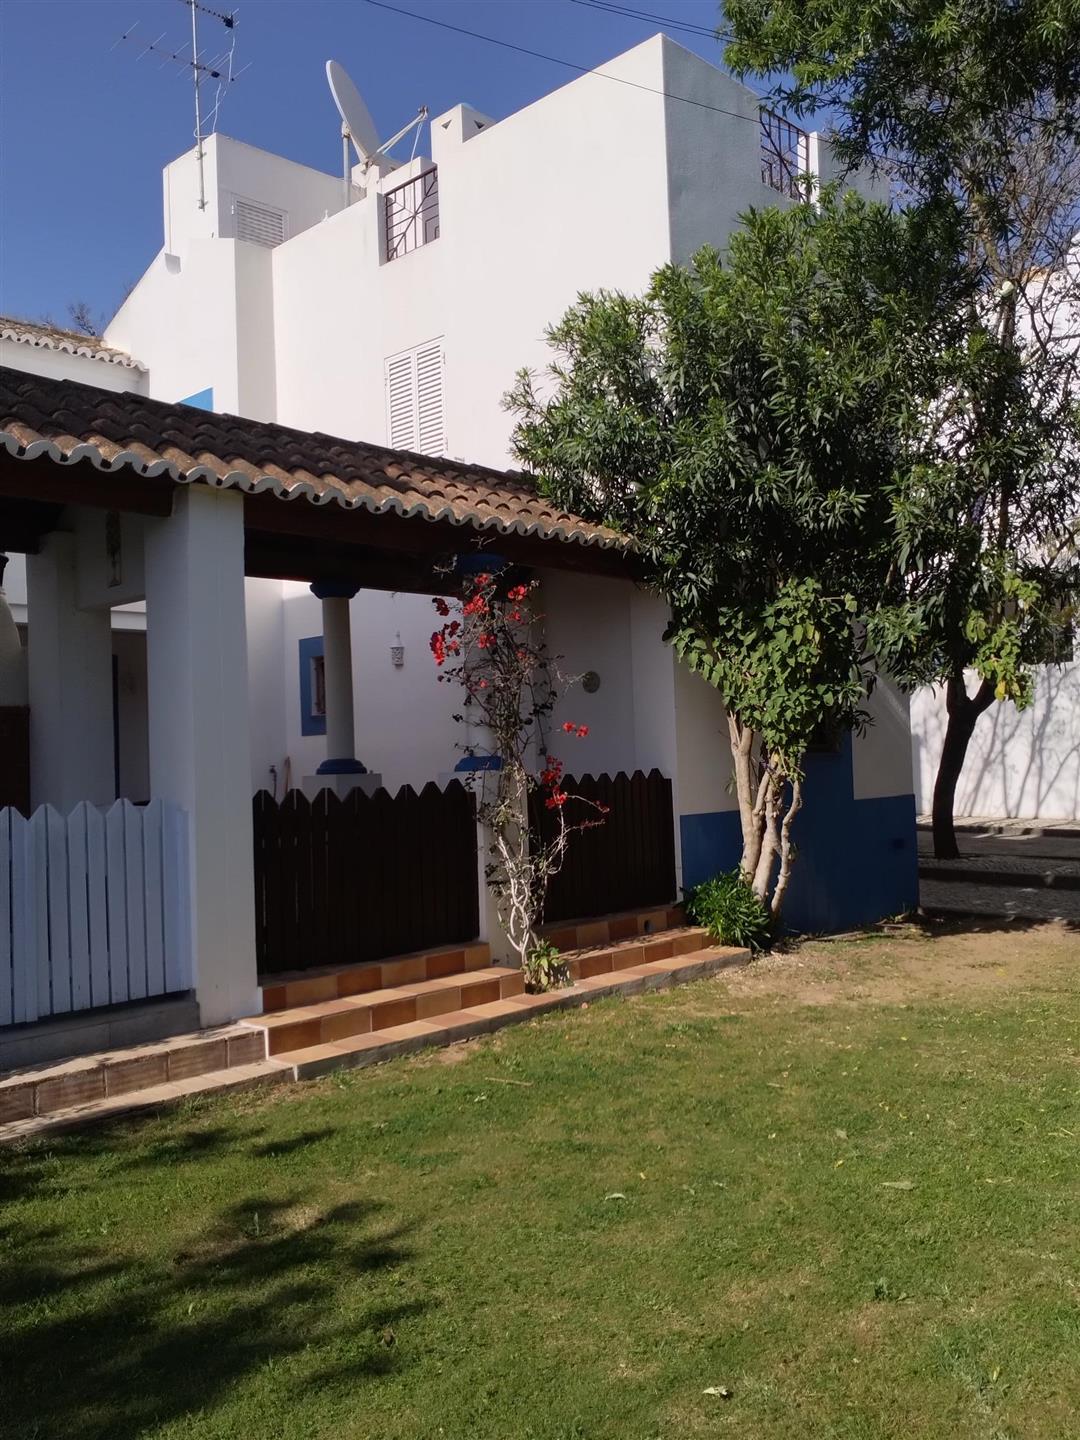 3 Bed Villa With Patio, Roof Terrace And Access  To S. Pool - Cabanas